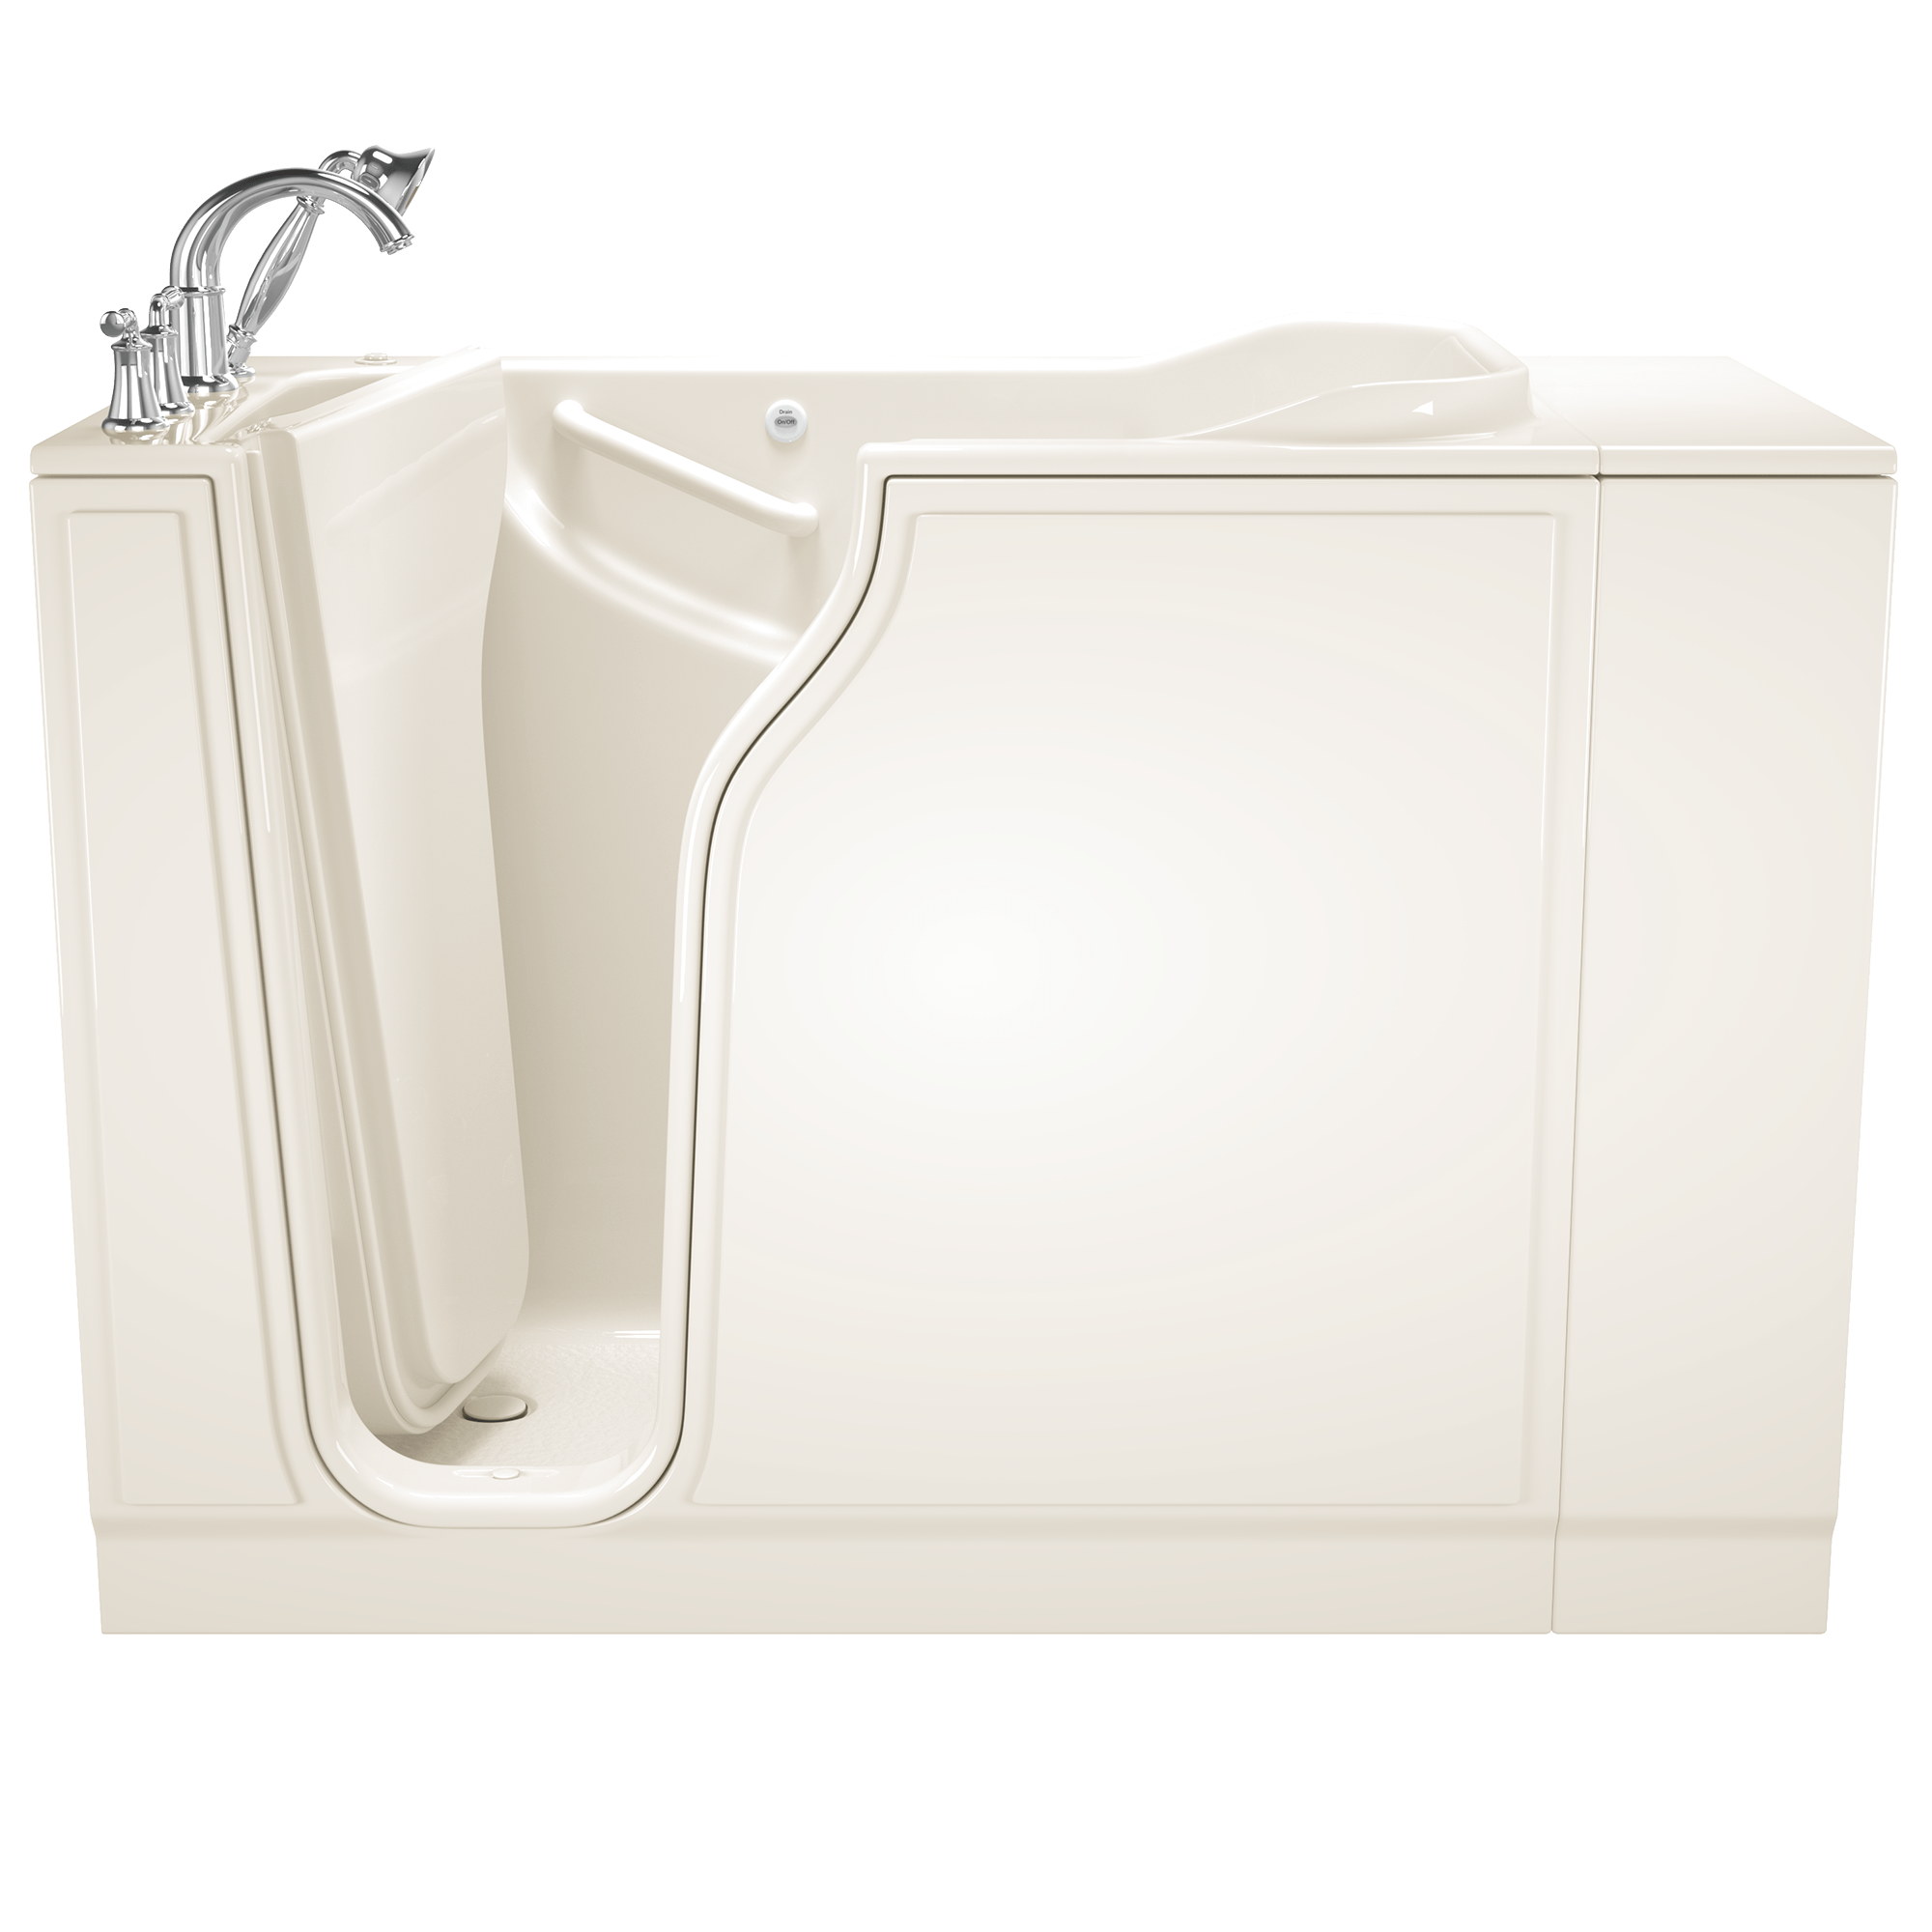 Gelcoat Value Series 30 x 52  Inch Walk in Tub With Whirlpool System   Left Hand Drain With Faucet WIB LINEN